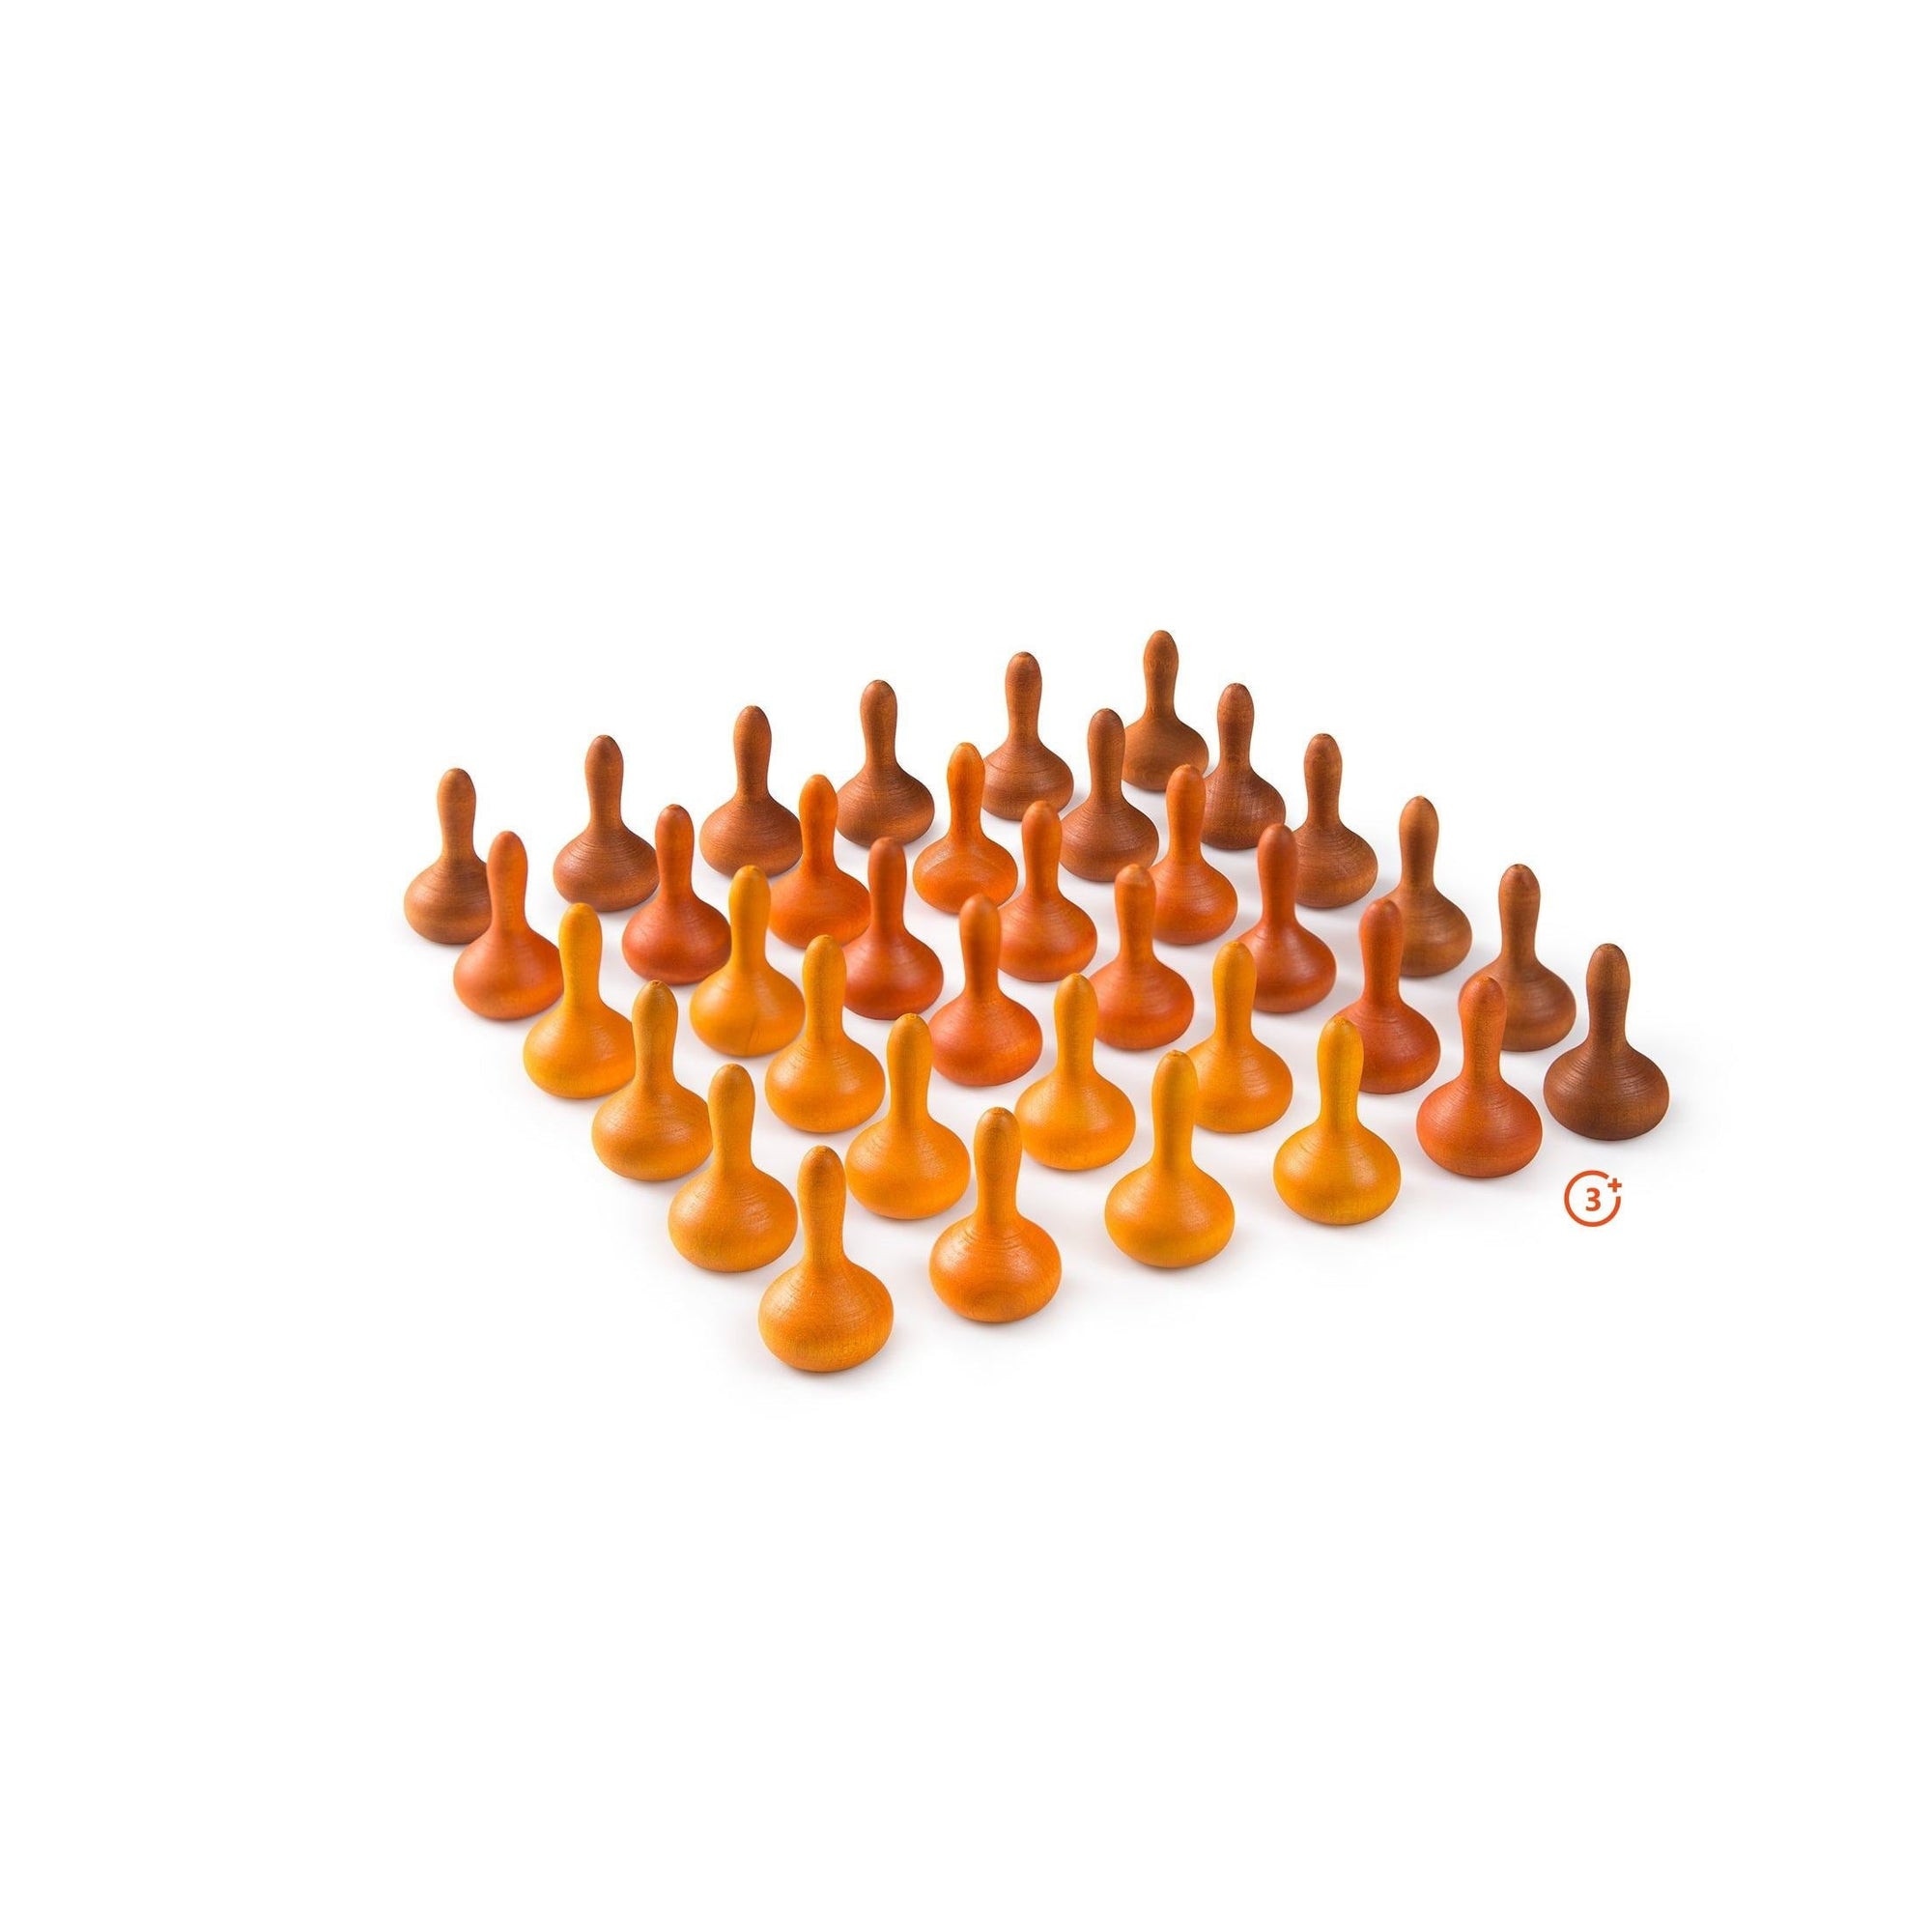 Grapat Loose Parts Squashes in Oranges - 36 pieces-Grapat-Modern Rascals